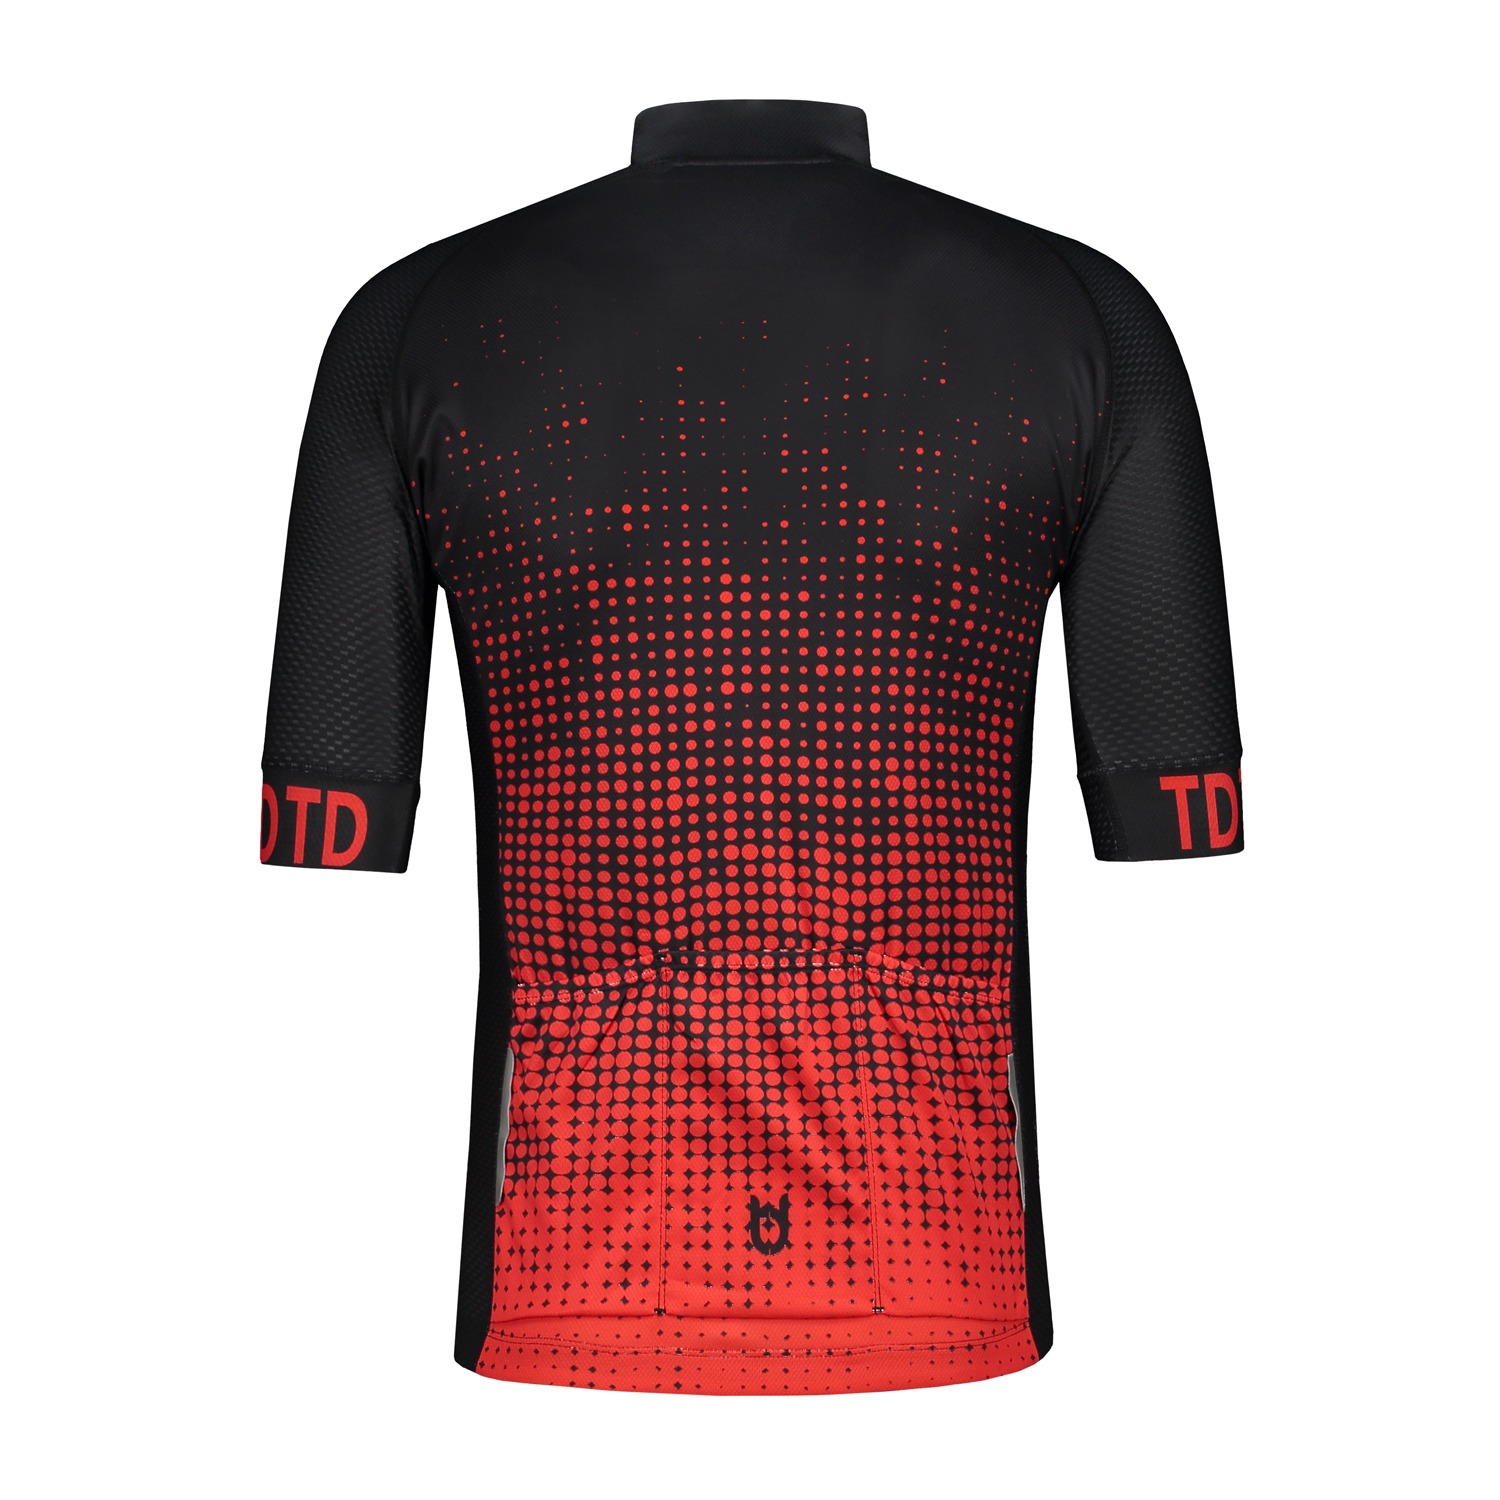 Red dot cyling jersey - The highest 